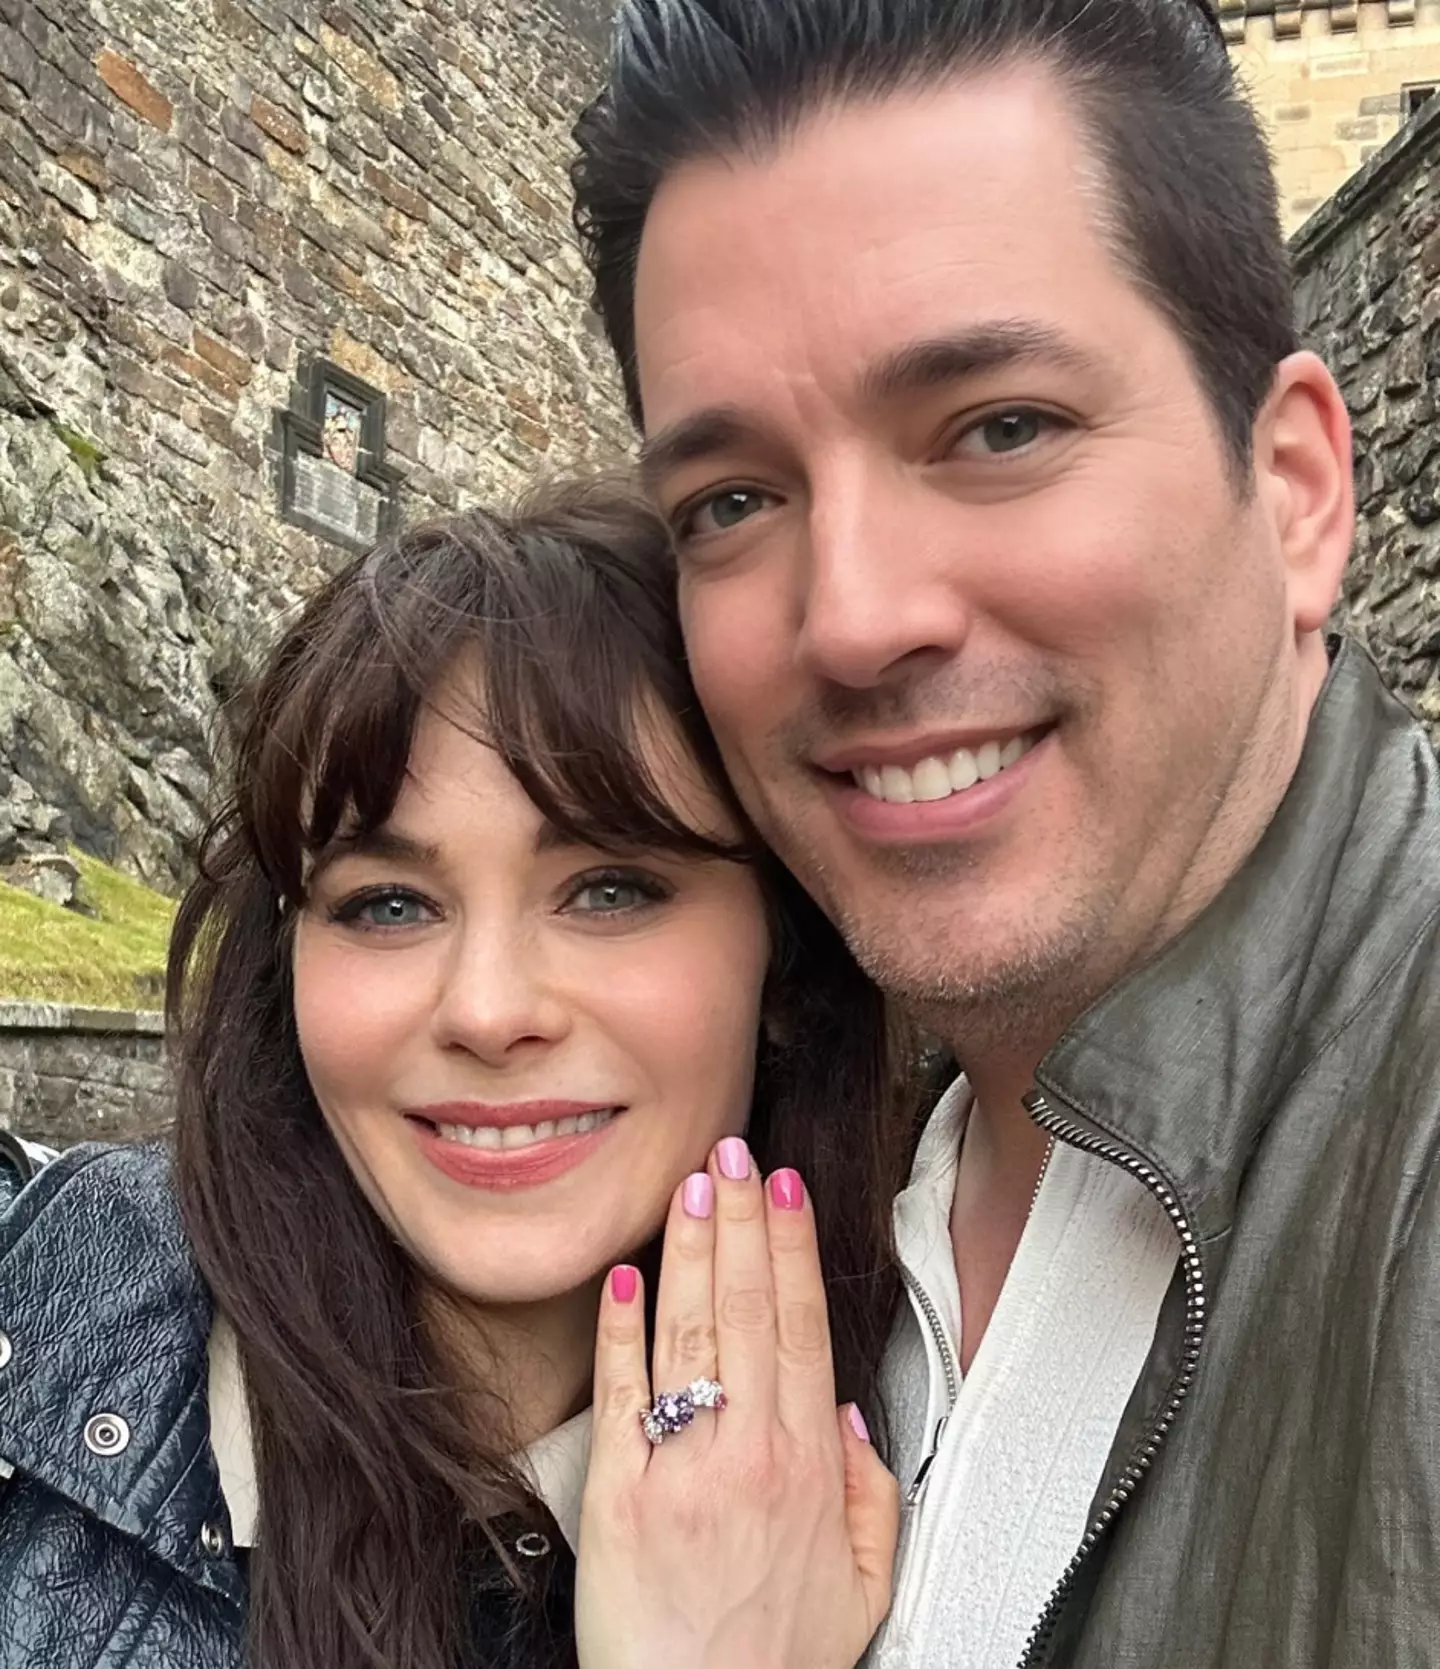 Zooey Deschanel is engaged to her Property Brothers boyfriend Jonathan Scott after four years of dating.